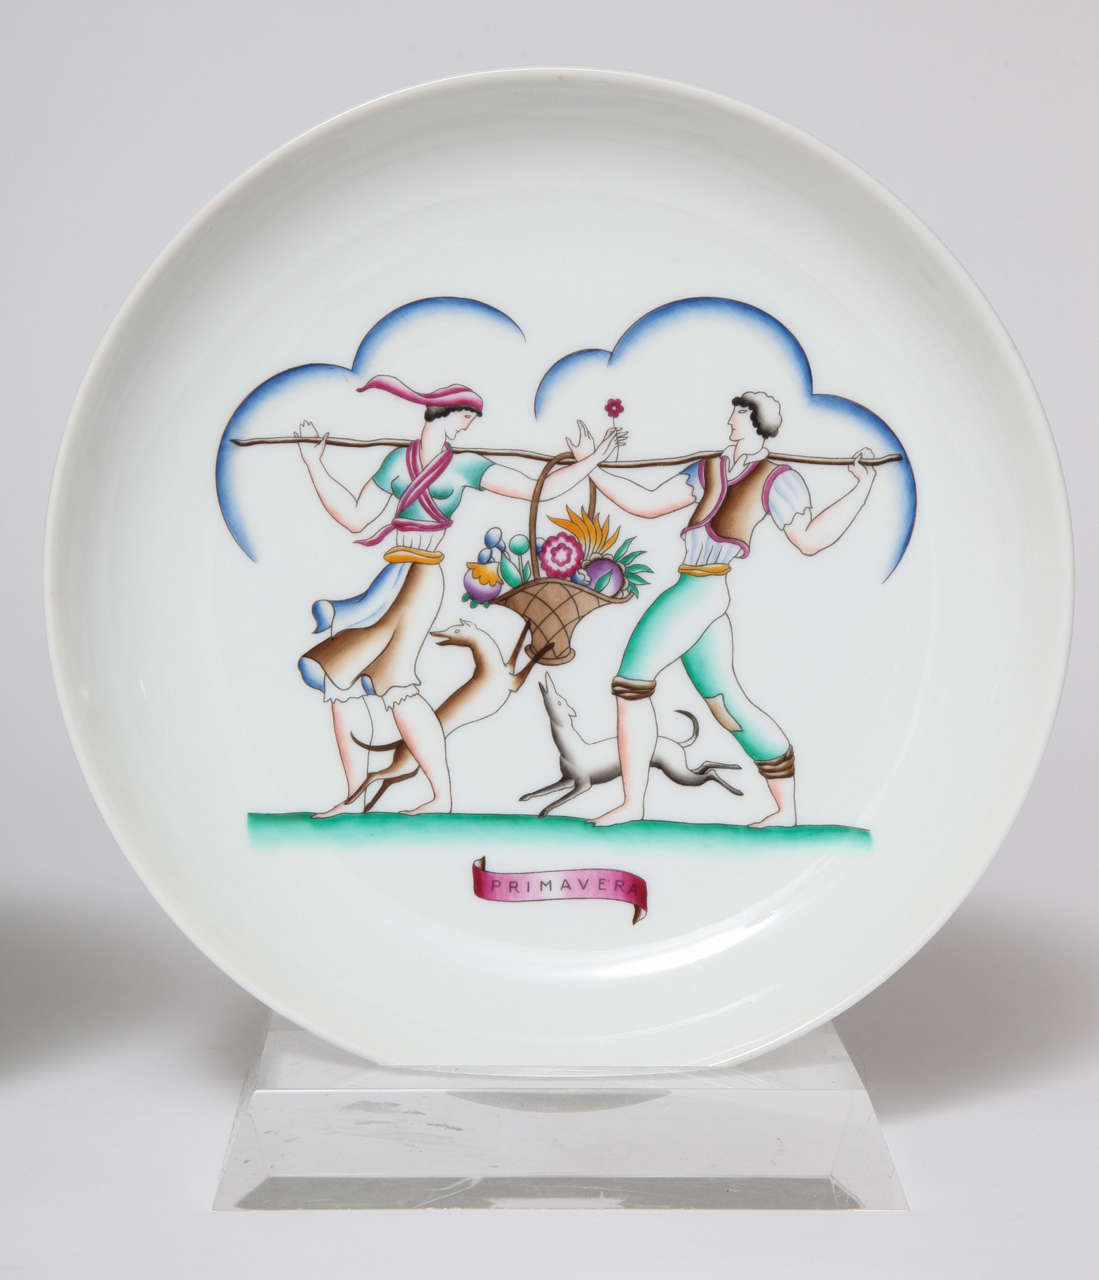 Four Richard Ginori Porcelain Plates in Mint condition designed by Gio Ponti depicting the Allegory of the Four Seasons, 1930, Italy.